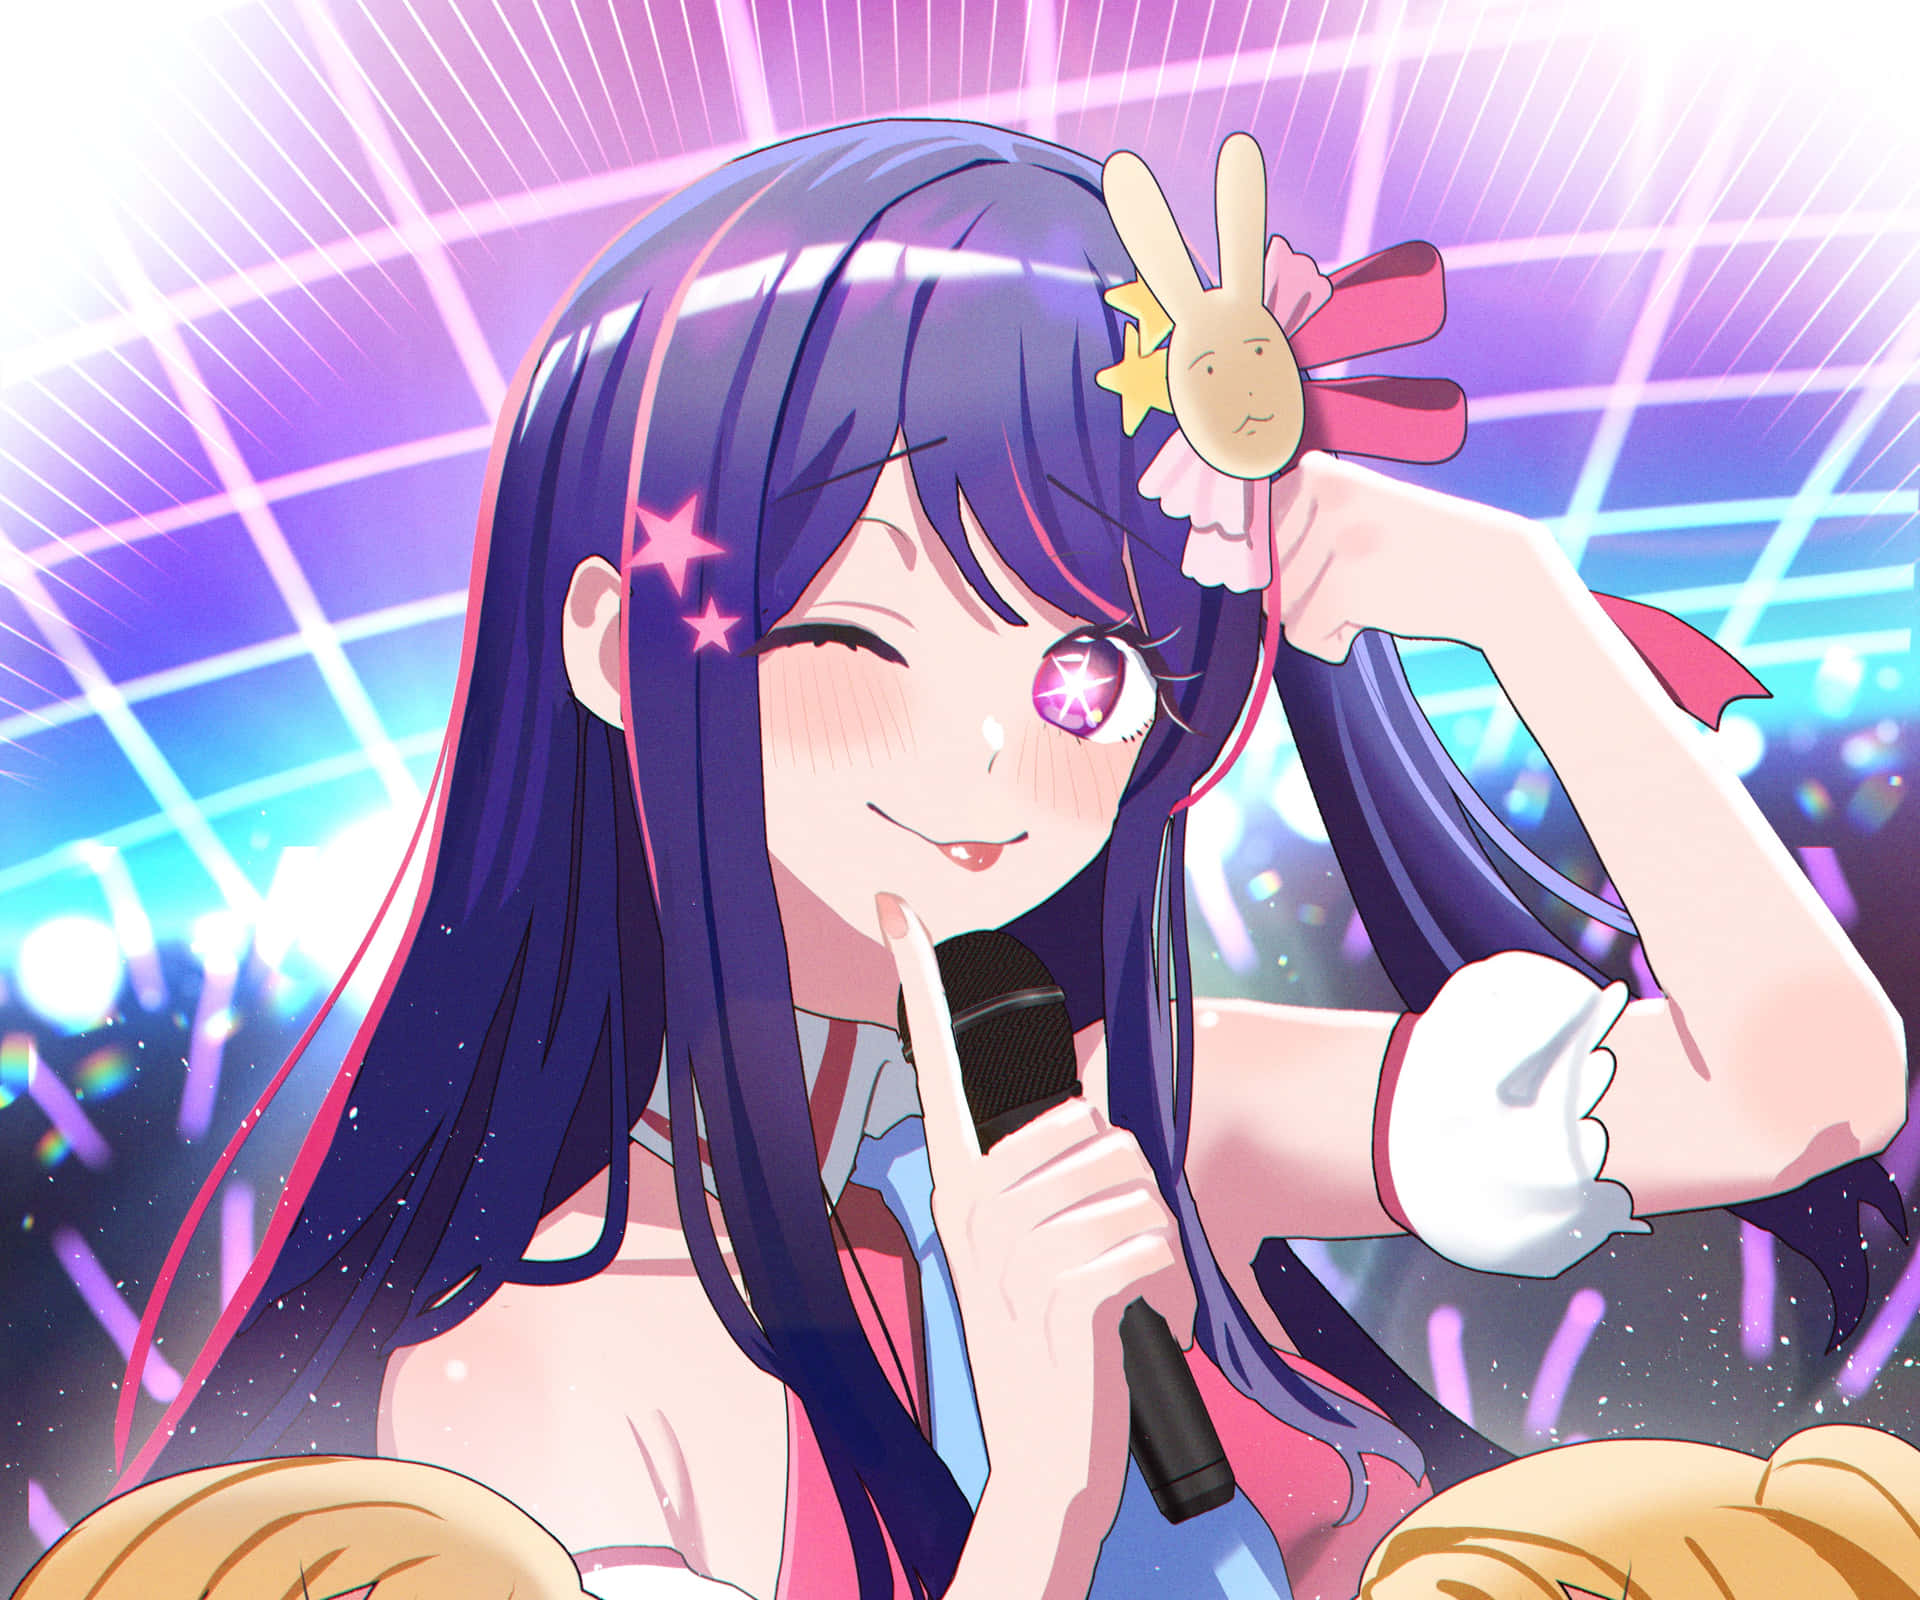 Animated Idol Performance Wink Peace Sign Wallpaper